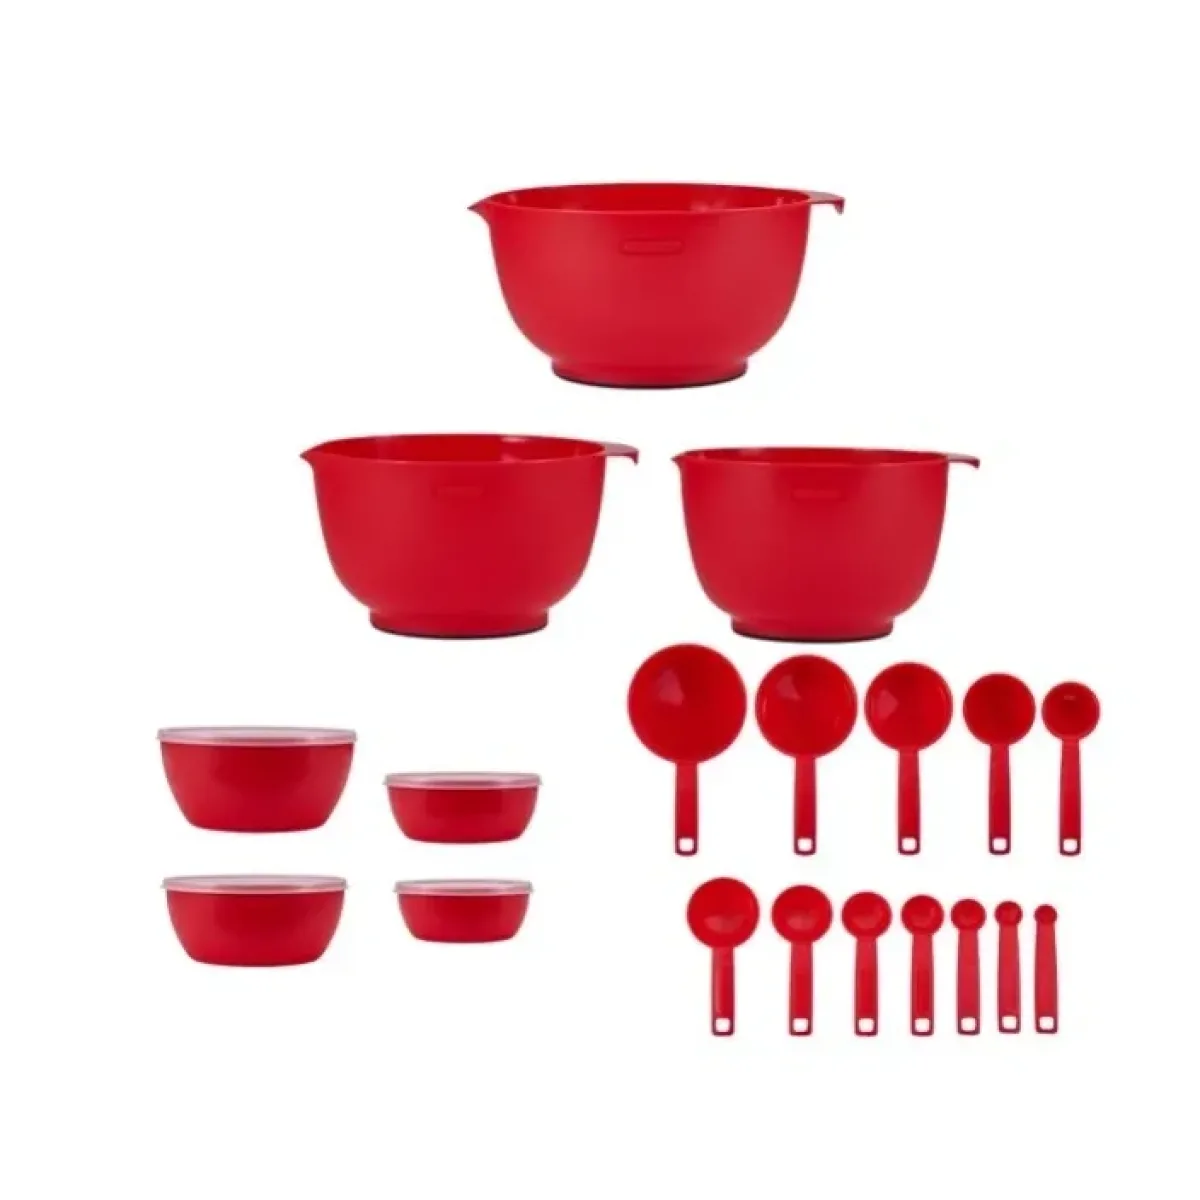 Farberware Professional 23-piece Mix and Measure Baking Set (Purchase) 2